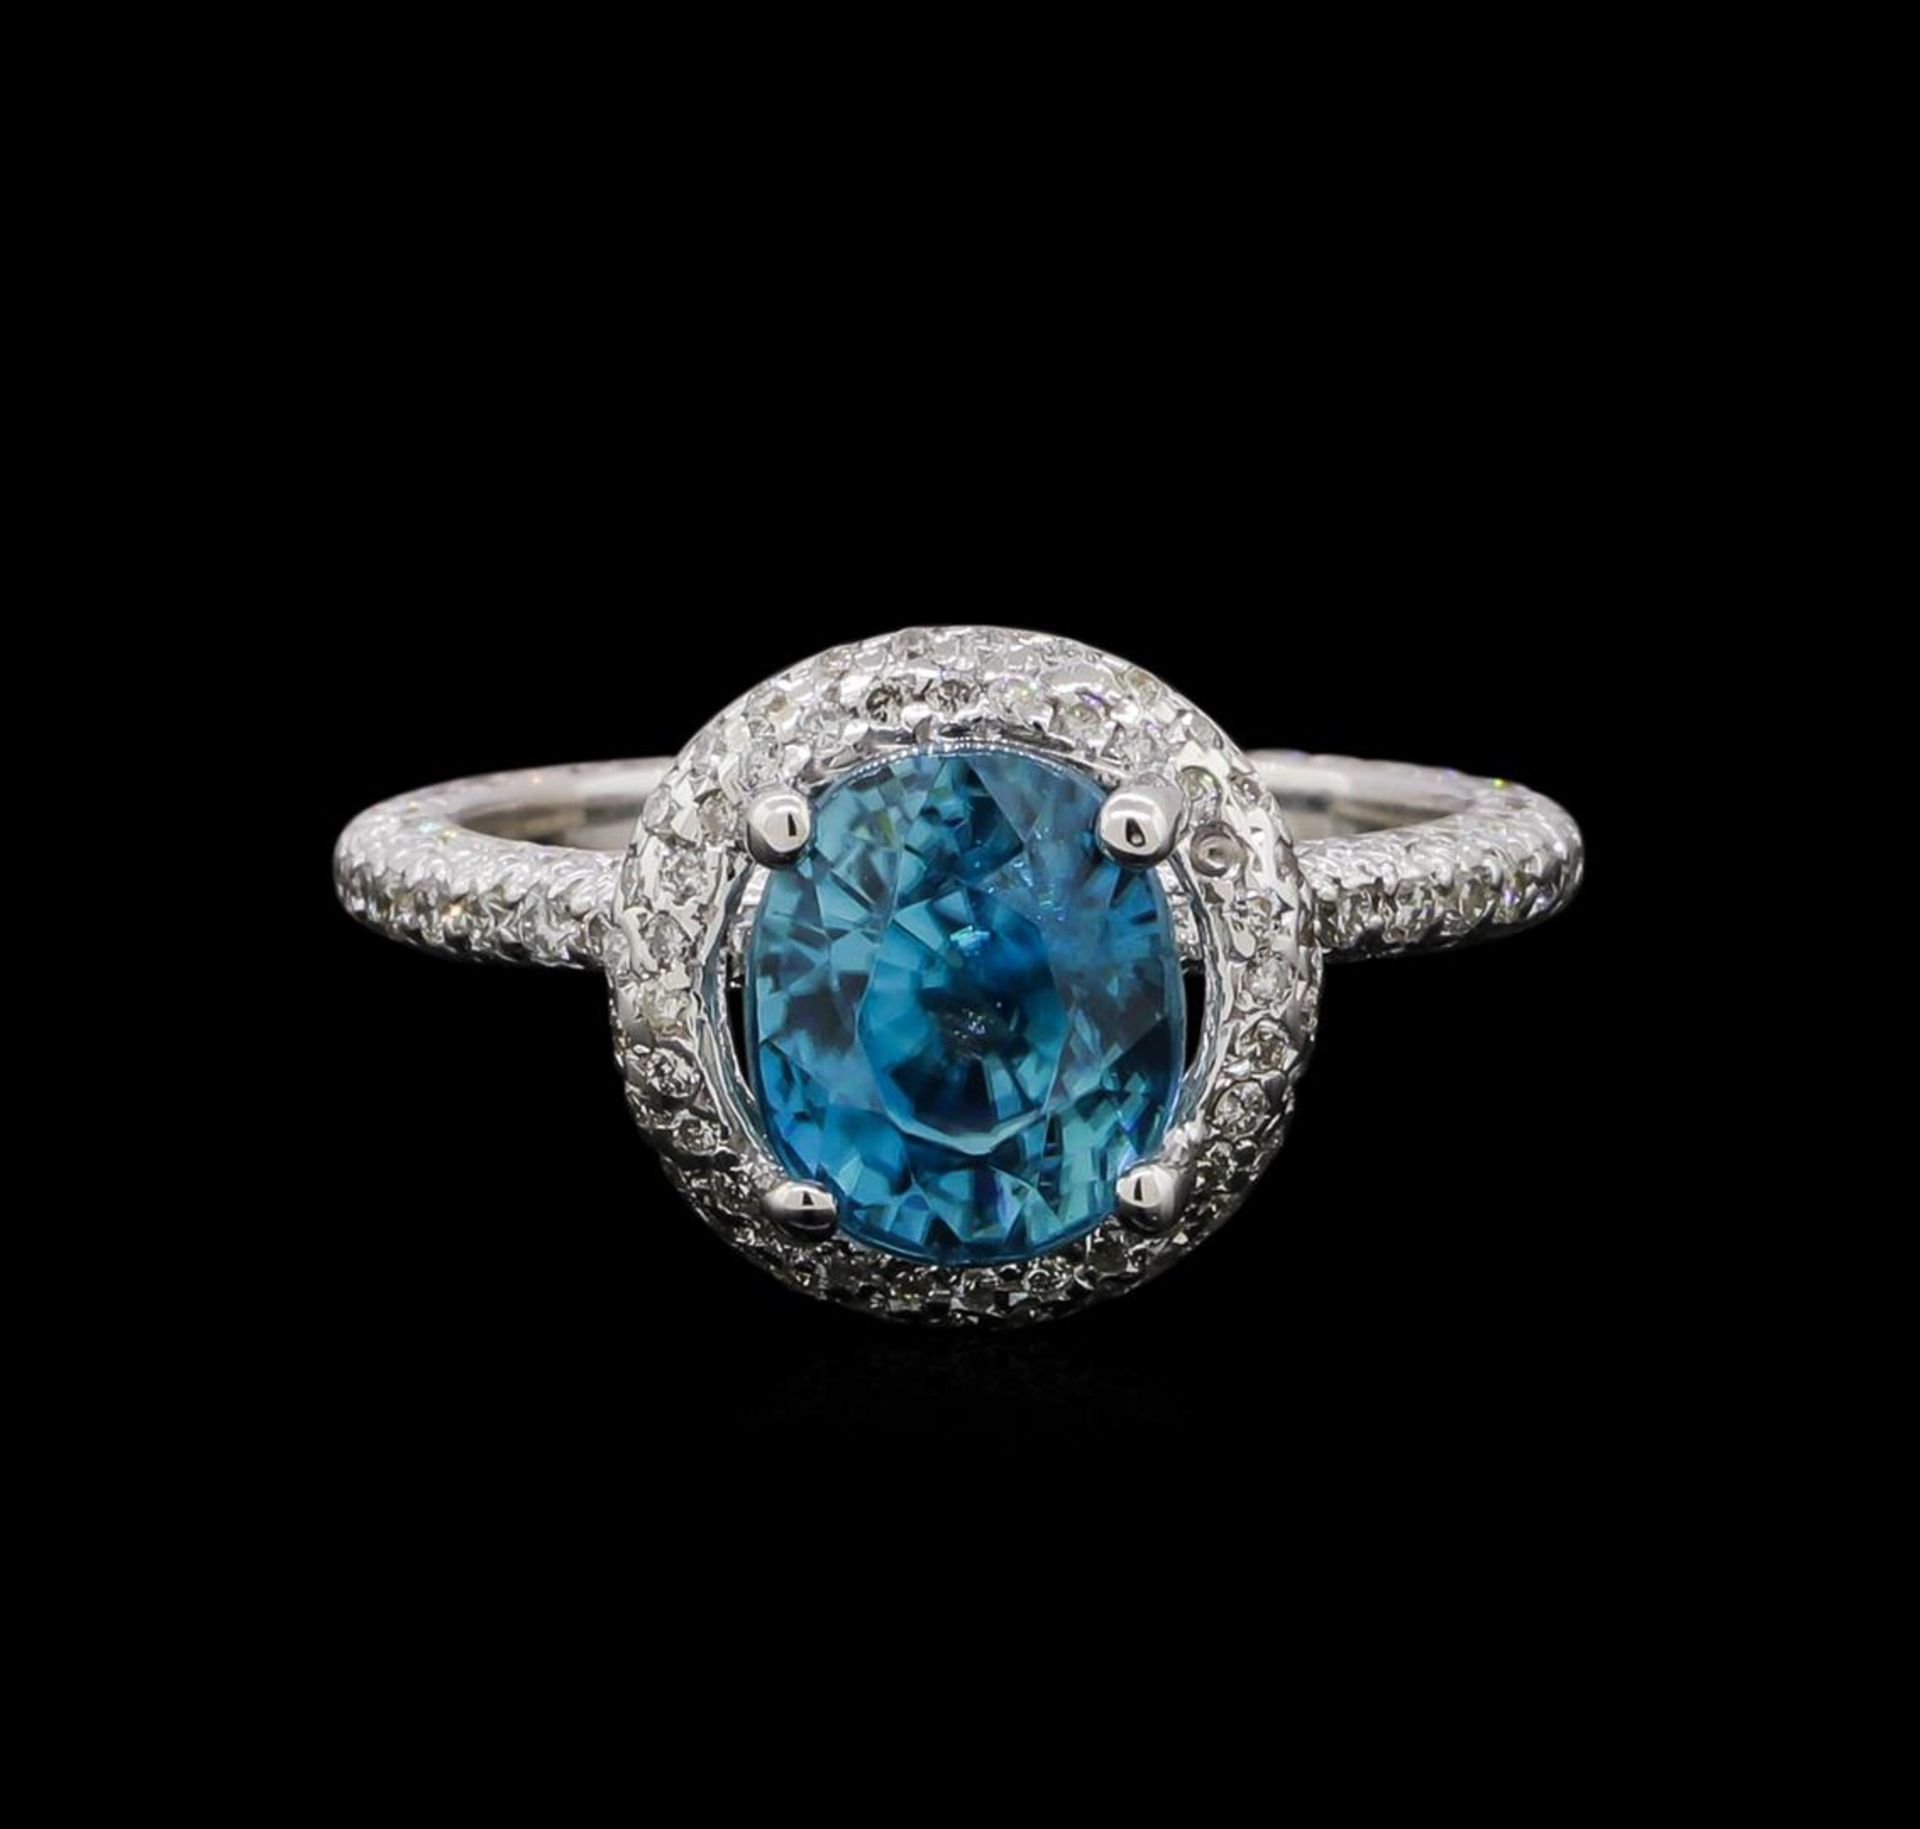 4.23 ctw Blue Zircon and Diamond Ring - 14KT White Gold - Image 2 of 5